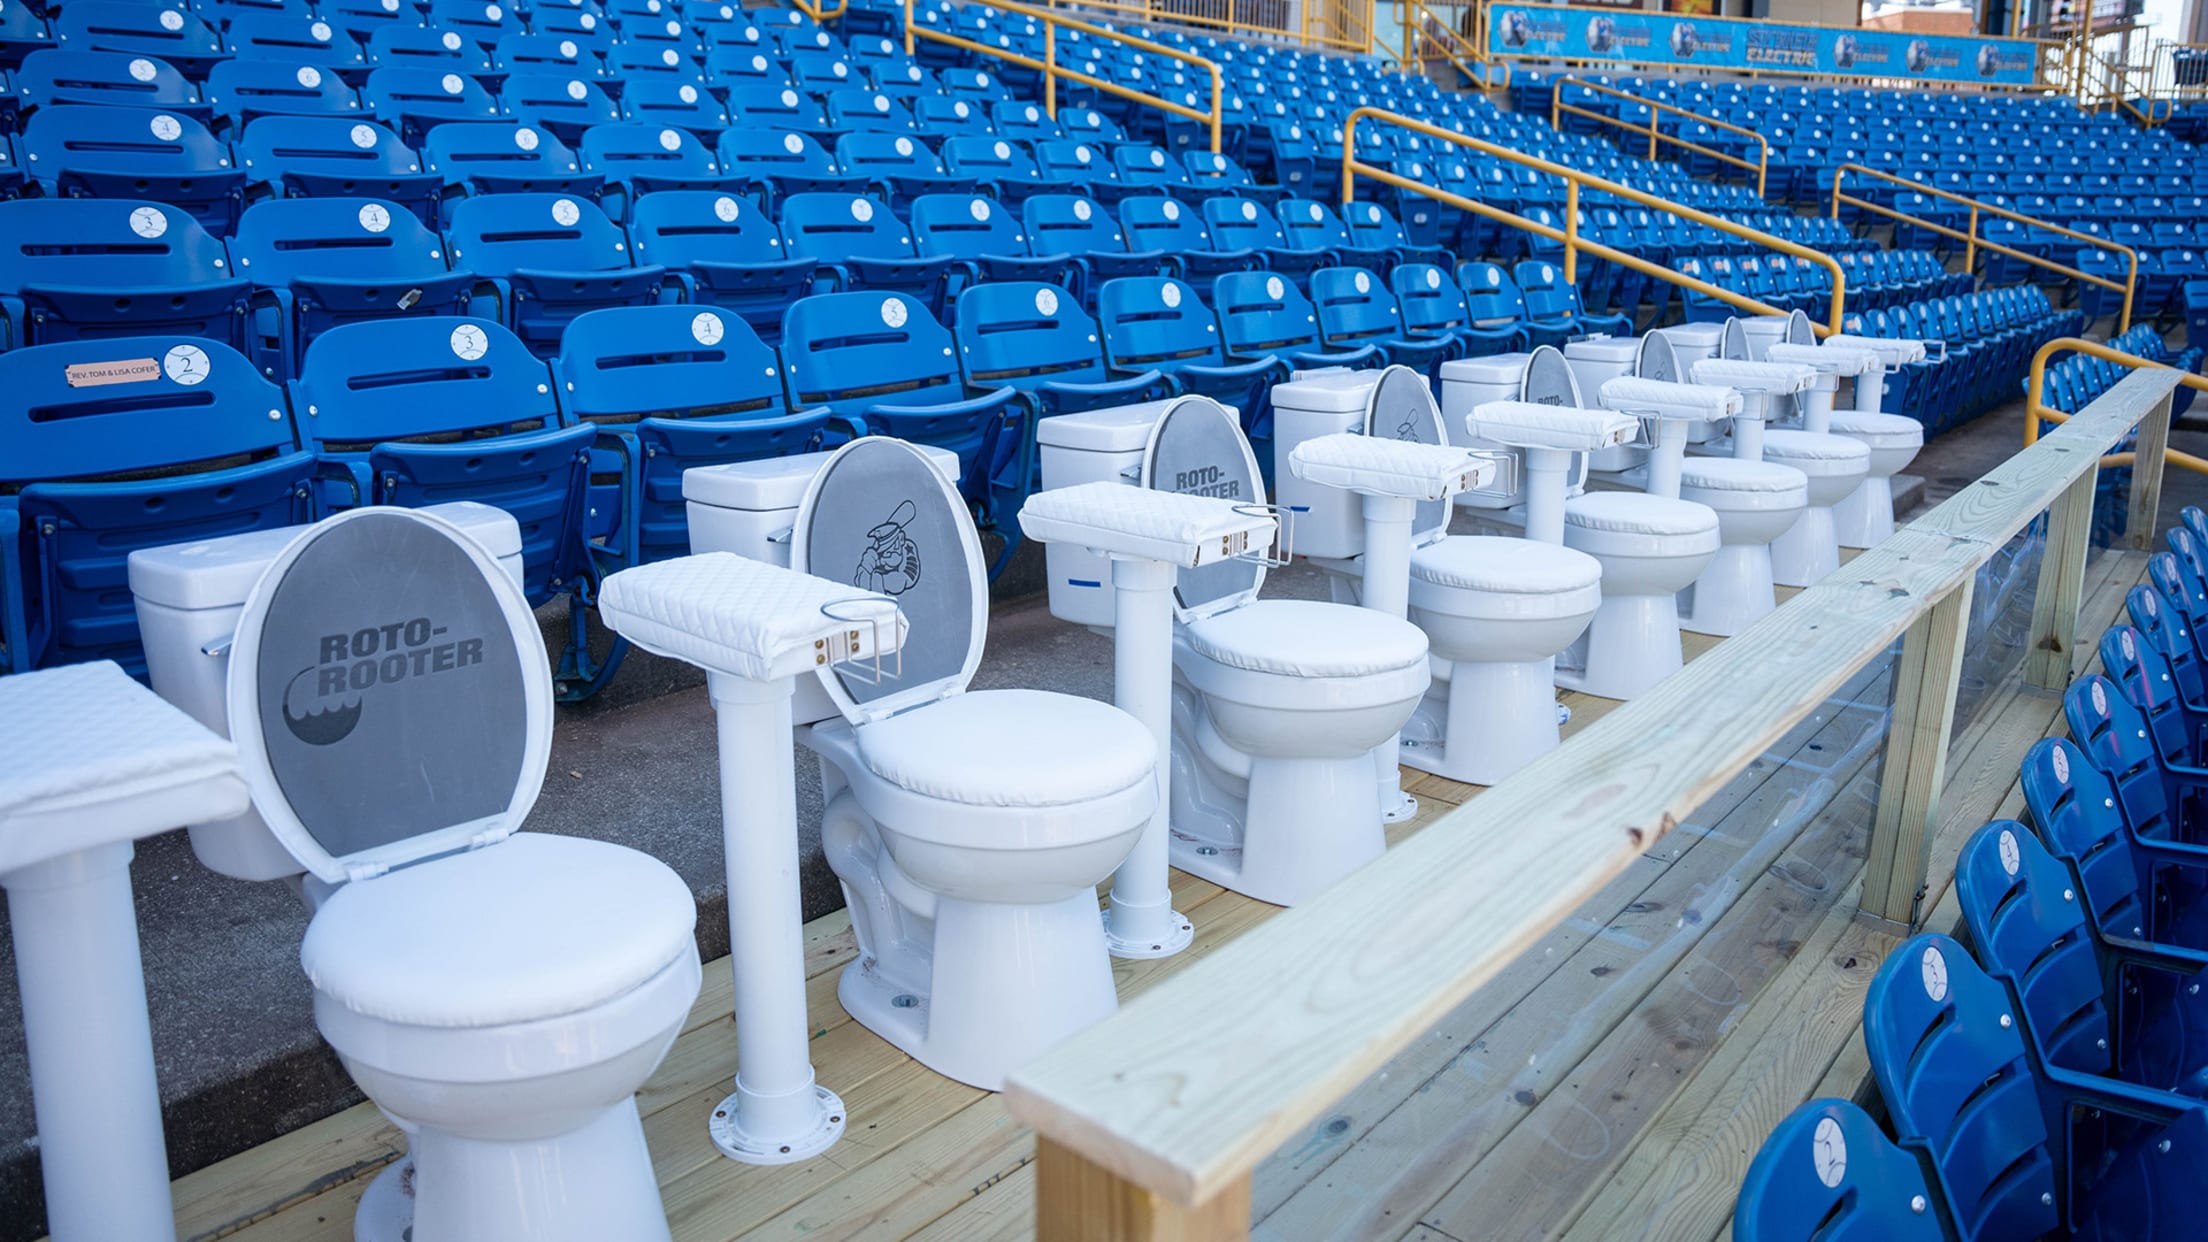 Fans at one Minor League ballpark can now sit on toilets in the stands to watch the game